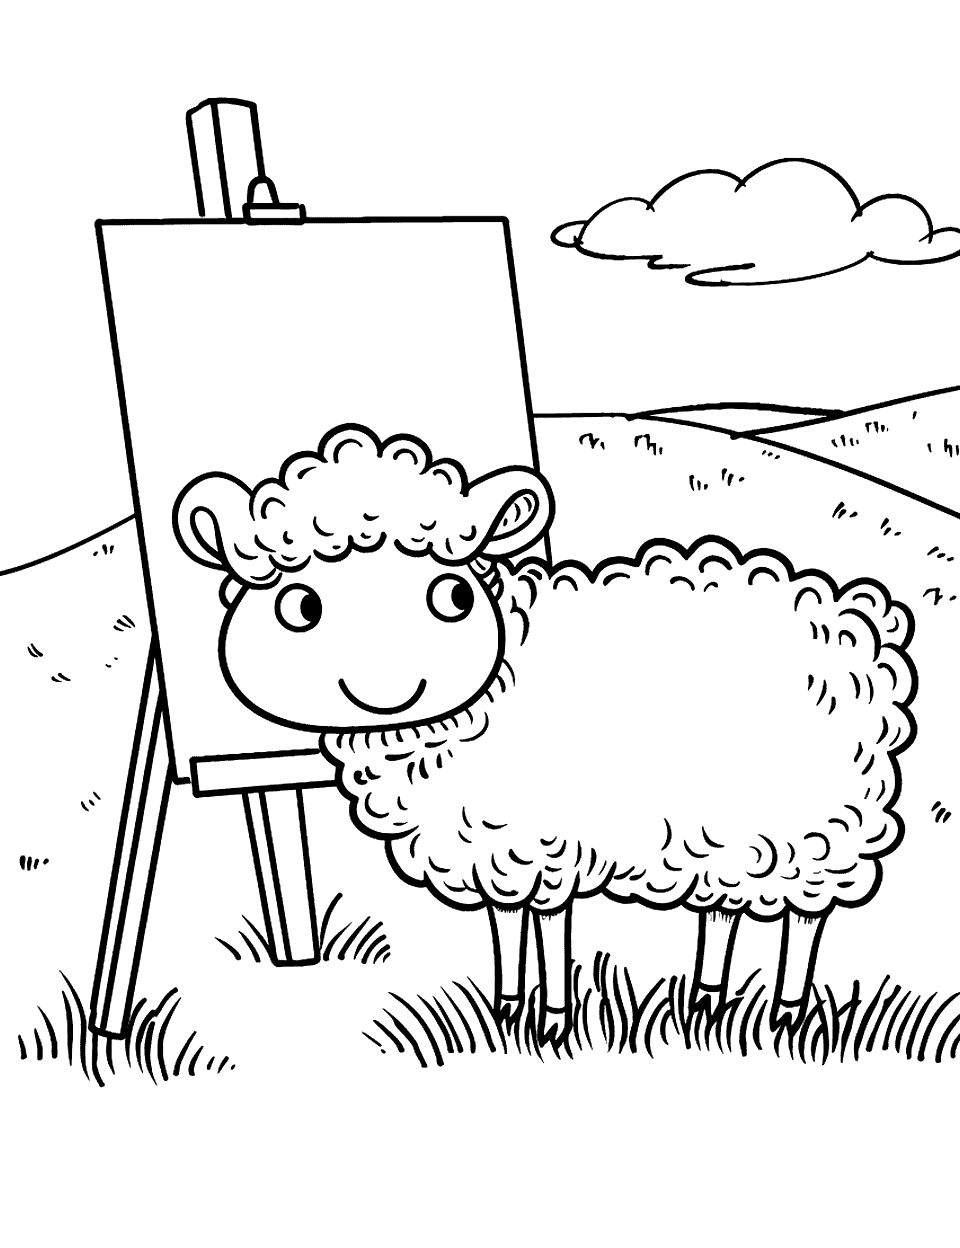 Artist Sheep Painter Coloring Page - A sheep with a canvas in front of it in the field with a mountain in the background.